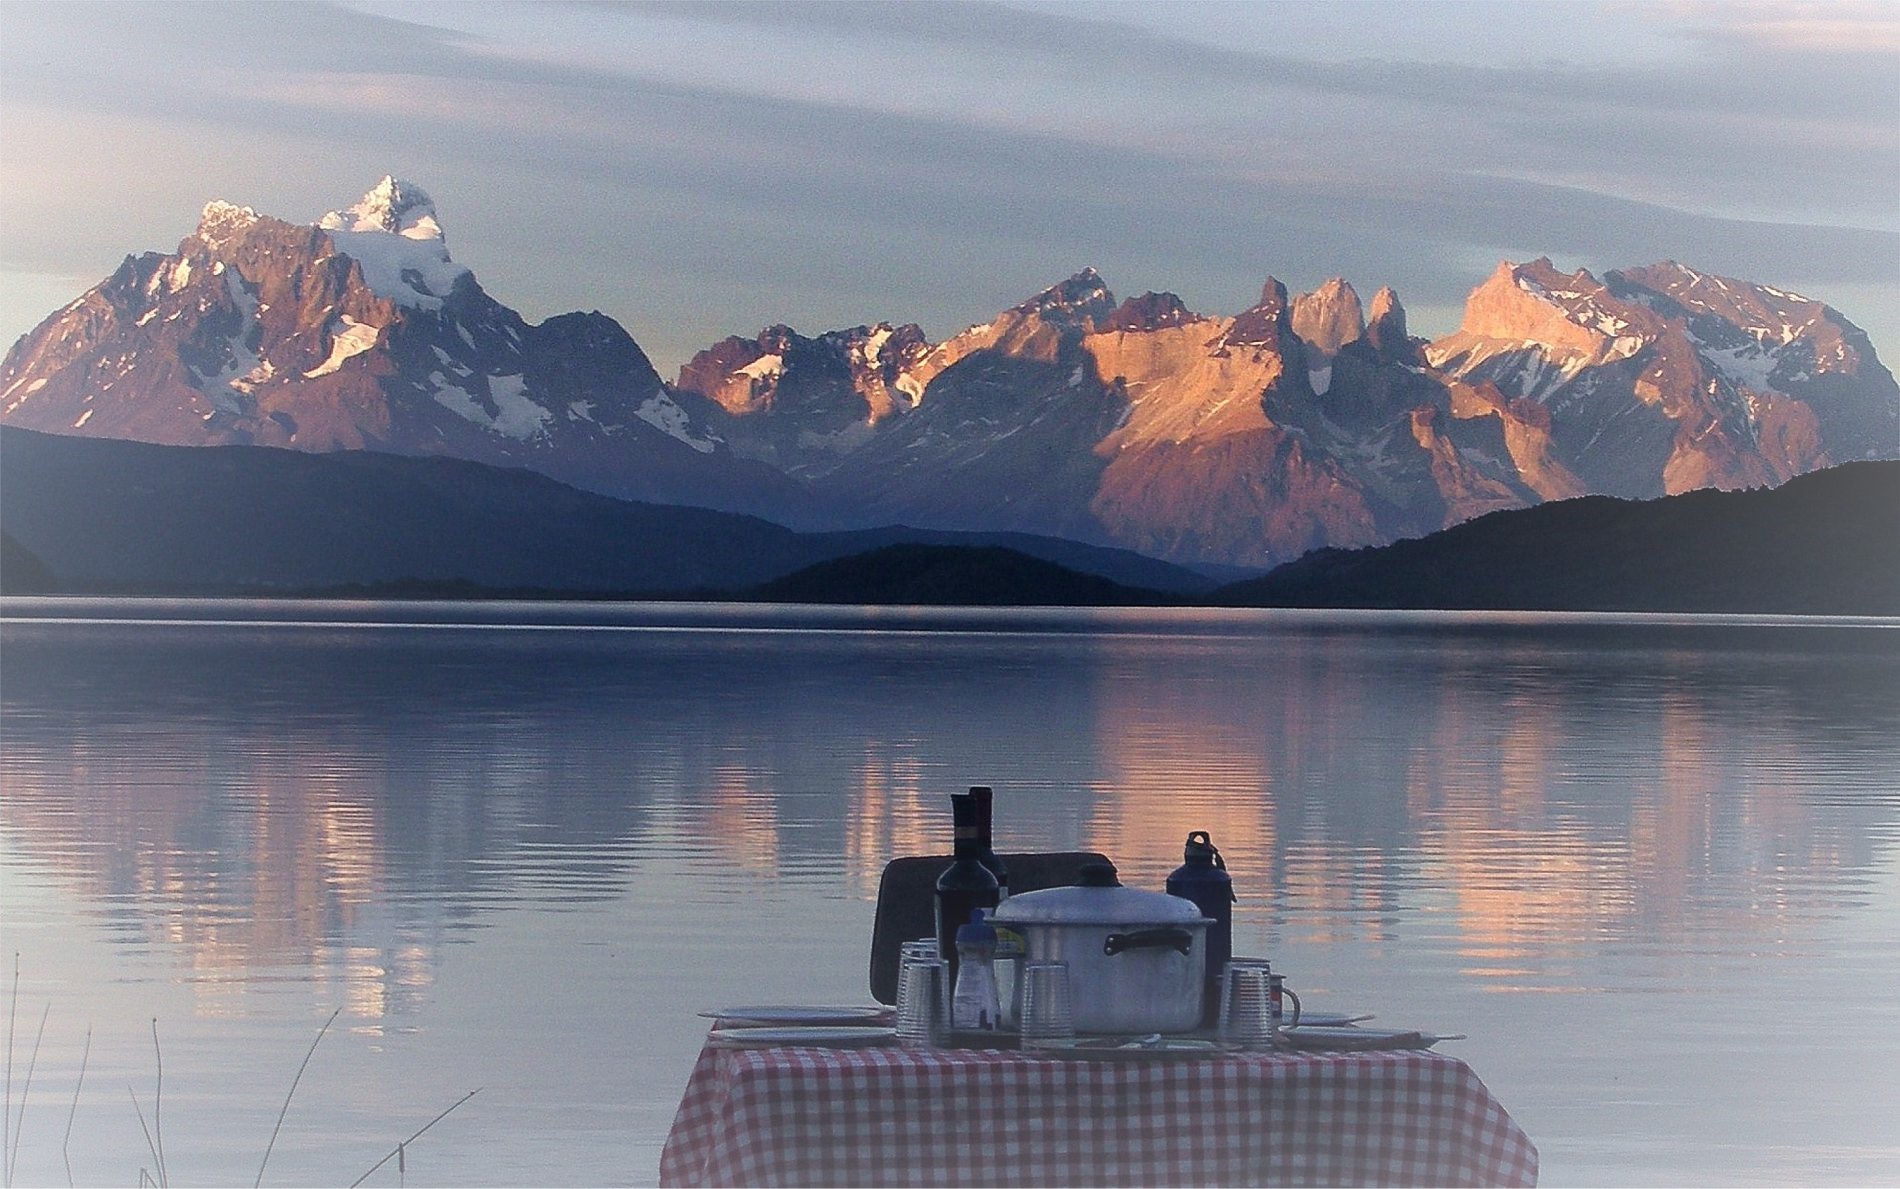 Torres del Paine lodging options